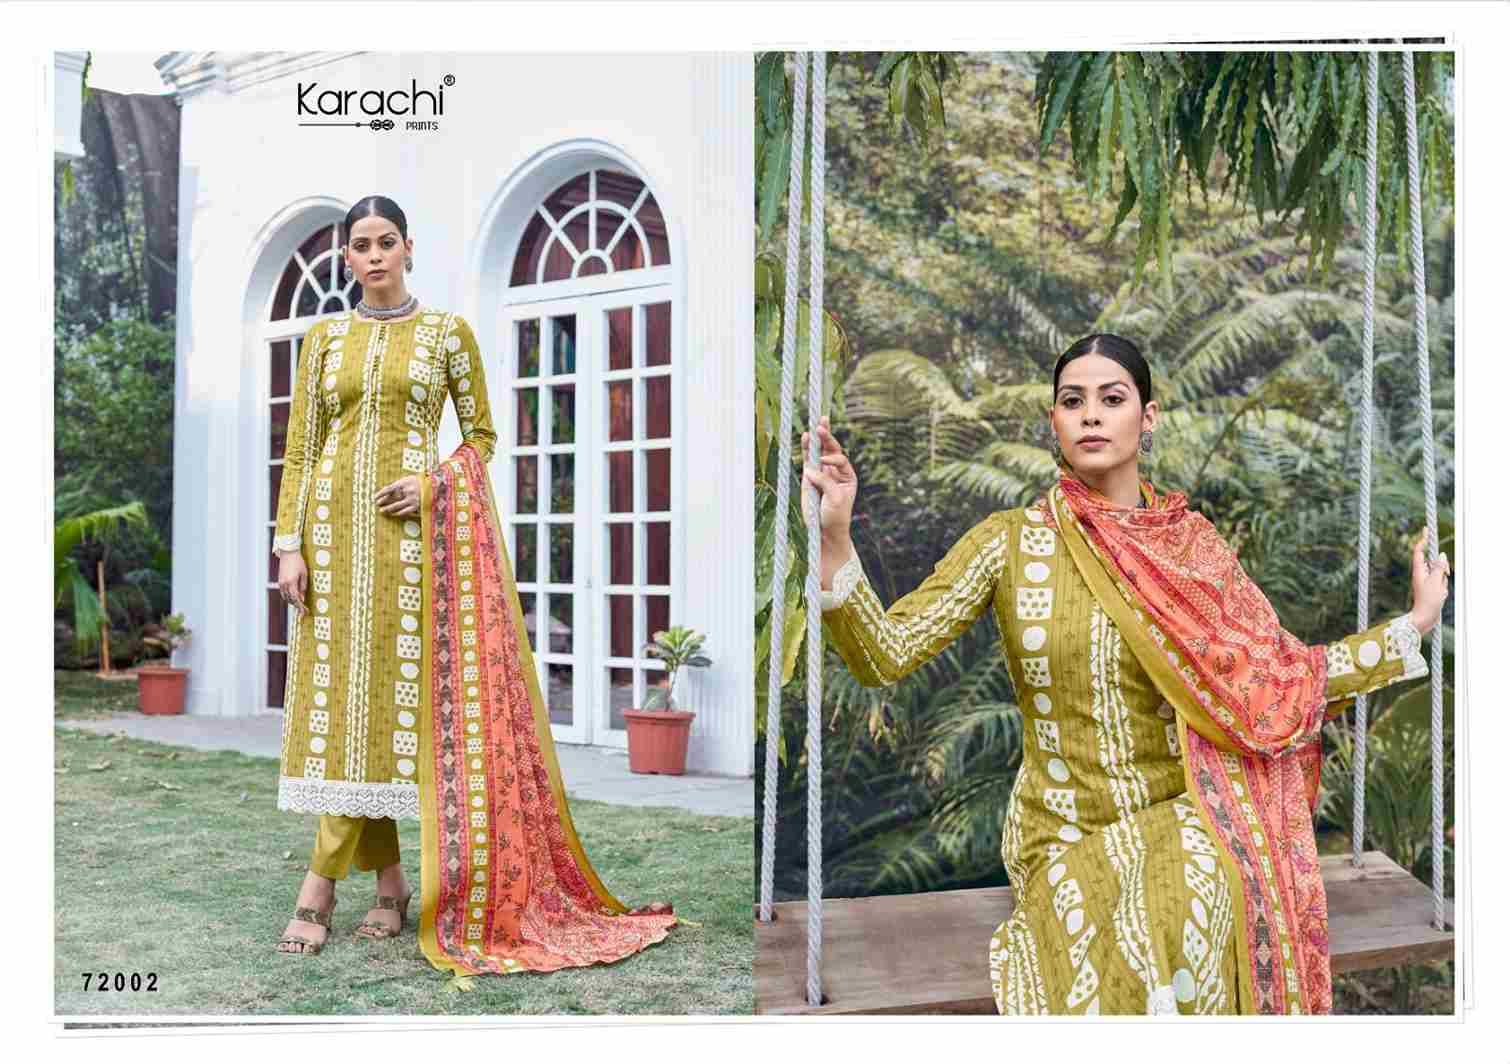 Olivia By Karachi Prints 72001 To 72008 Series Beautiful Festive Suits Stylish Fancy Colorful Casual Wear & Ethnic Wear Pure Cambric Lawn Cotton Print Dresses At Wholesale Price